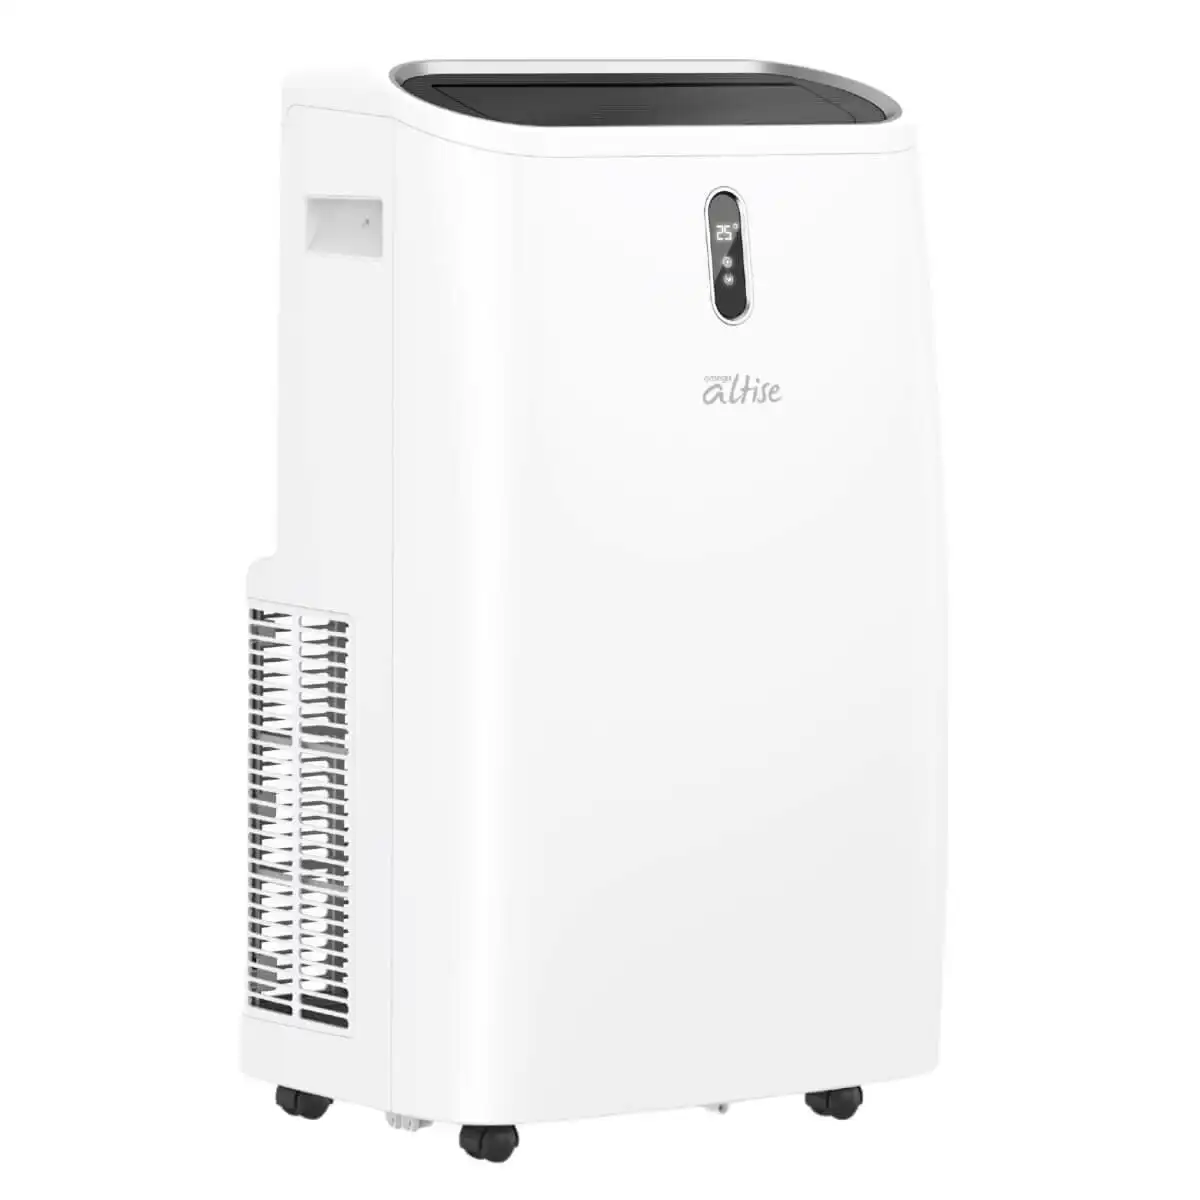 Omega Altise 3.5kW Reverse Cycle Portable Air Conditioner